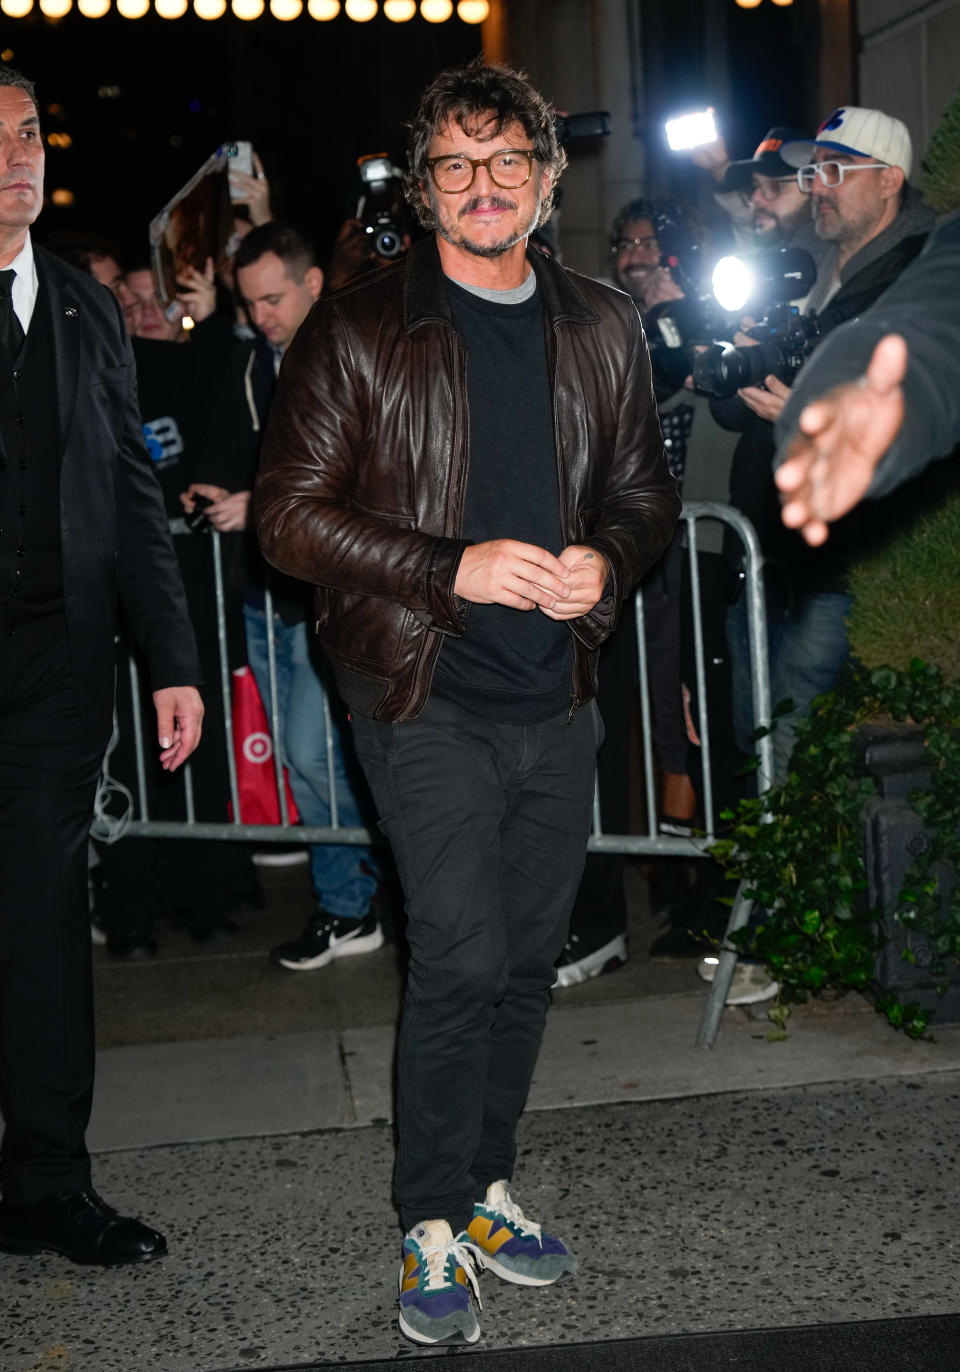 Pedro Pascal, SNL, New York, New Balance, sneakers, suede, party